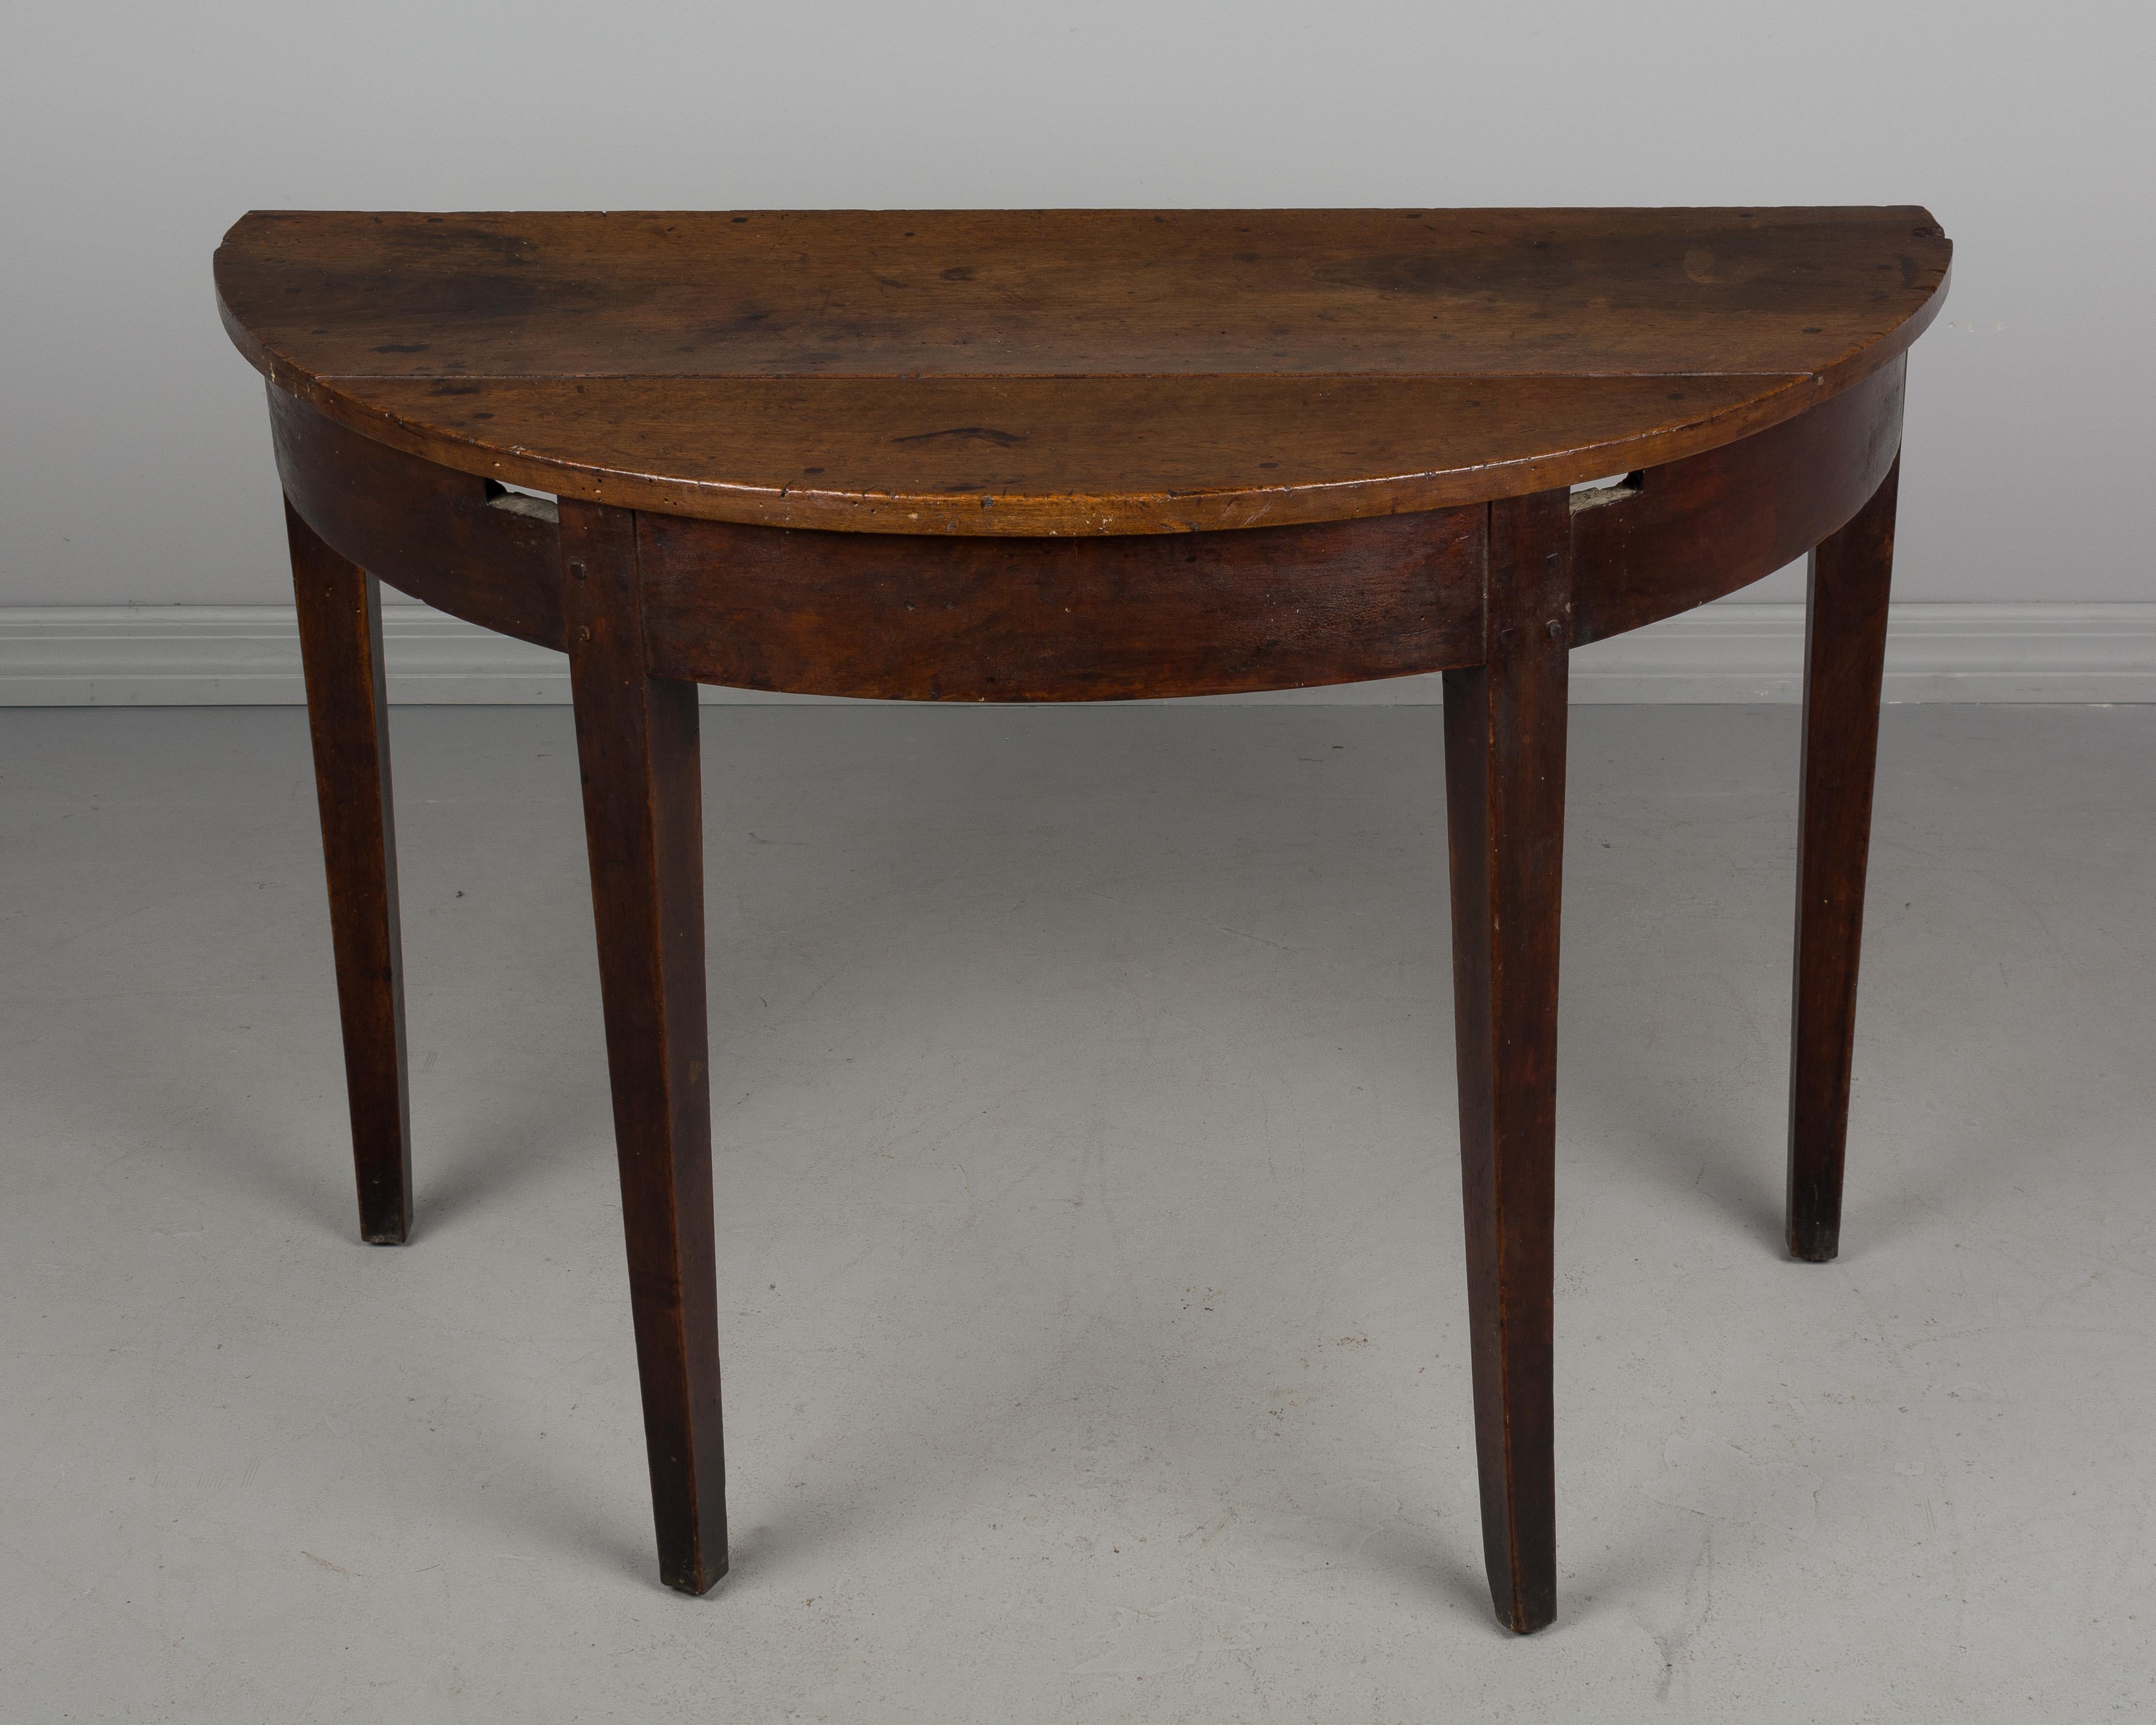 An early 19th century Country French demilune console table made of walnut. Small hidden dovetailed drawer in the back. Pegged construction. Waxed patina. This table used to have a top and a fifth leg.